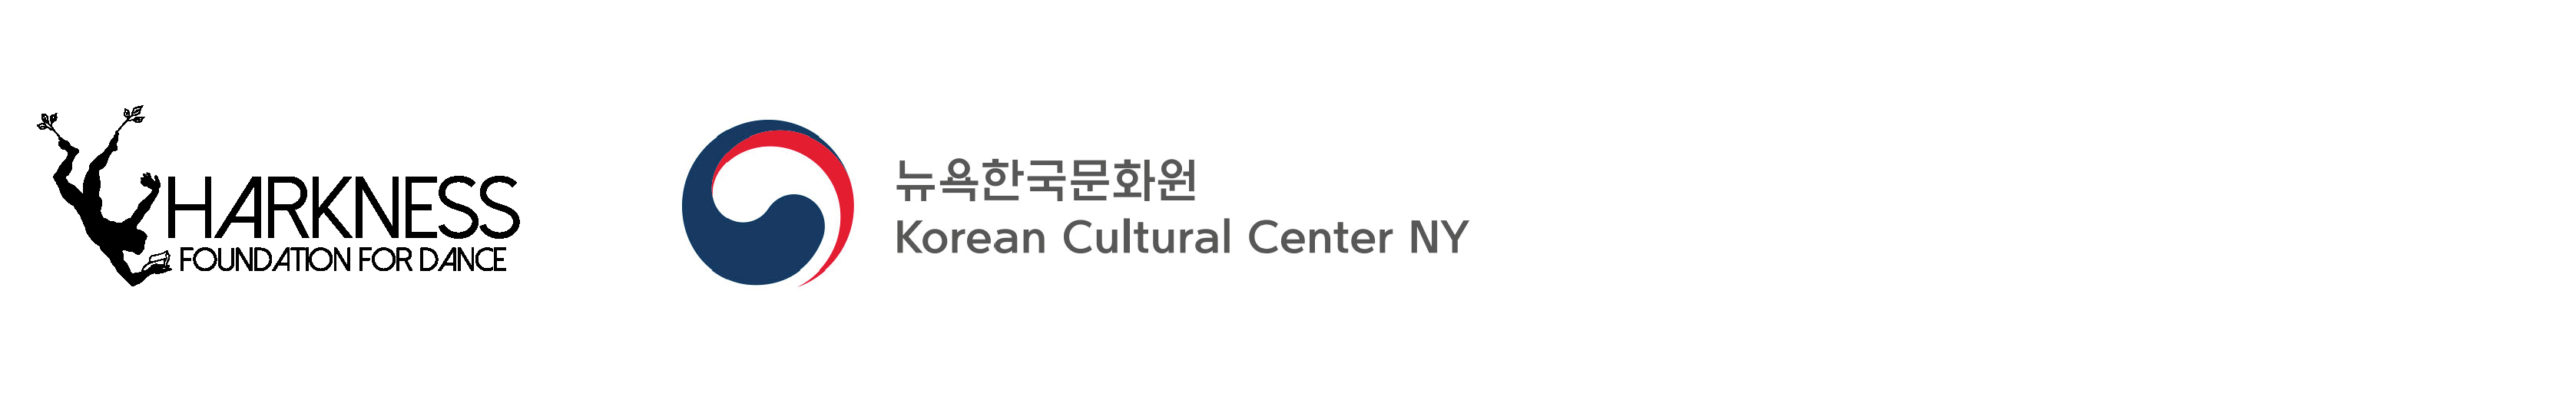 Korean Cultural Center NY & Harkness Foundation for dance